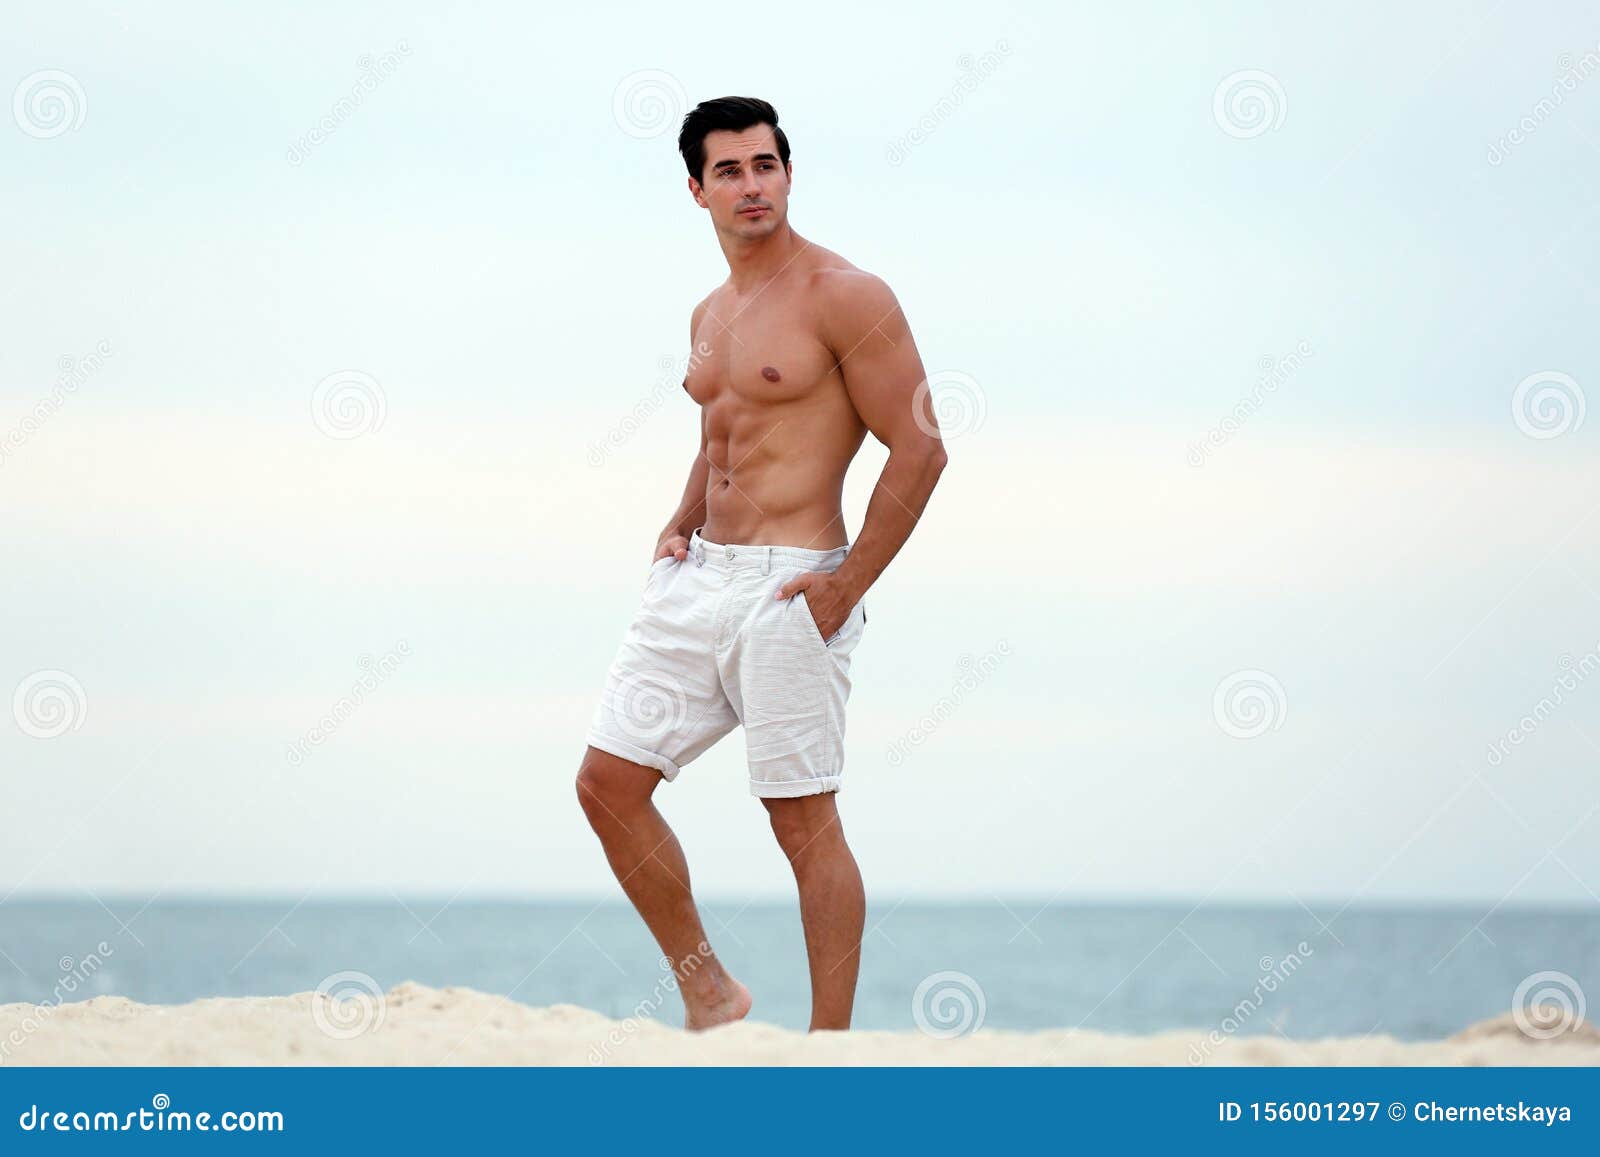 18,18 Young Male Model Posing Beach Photos   Free & Royalty Free ...